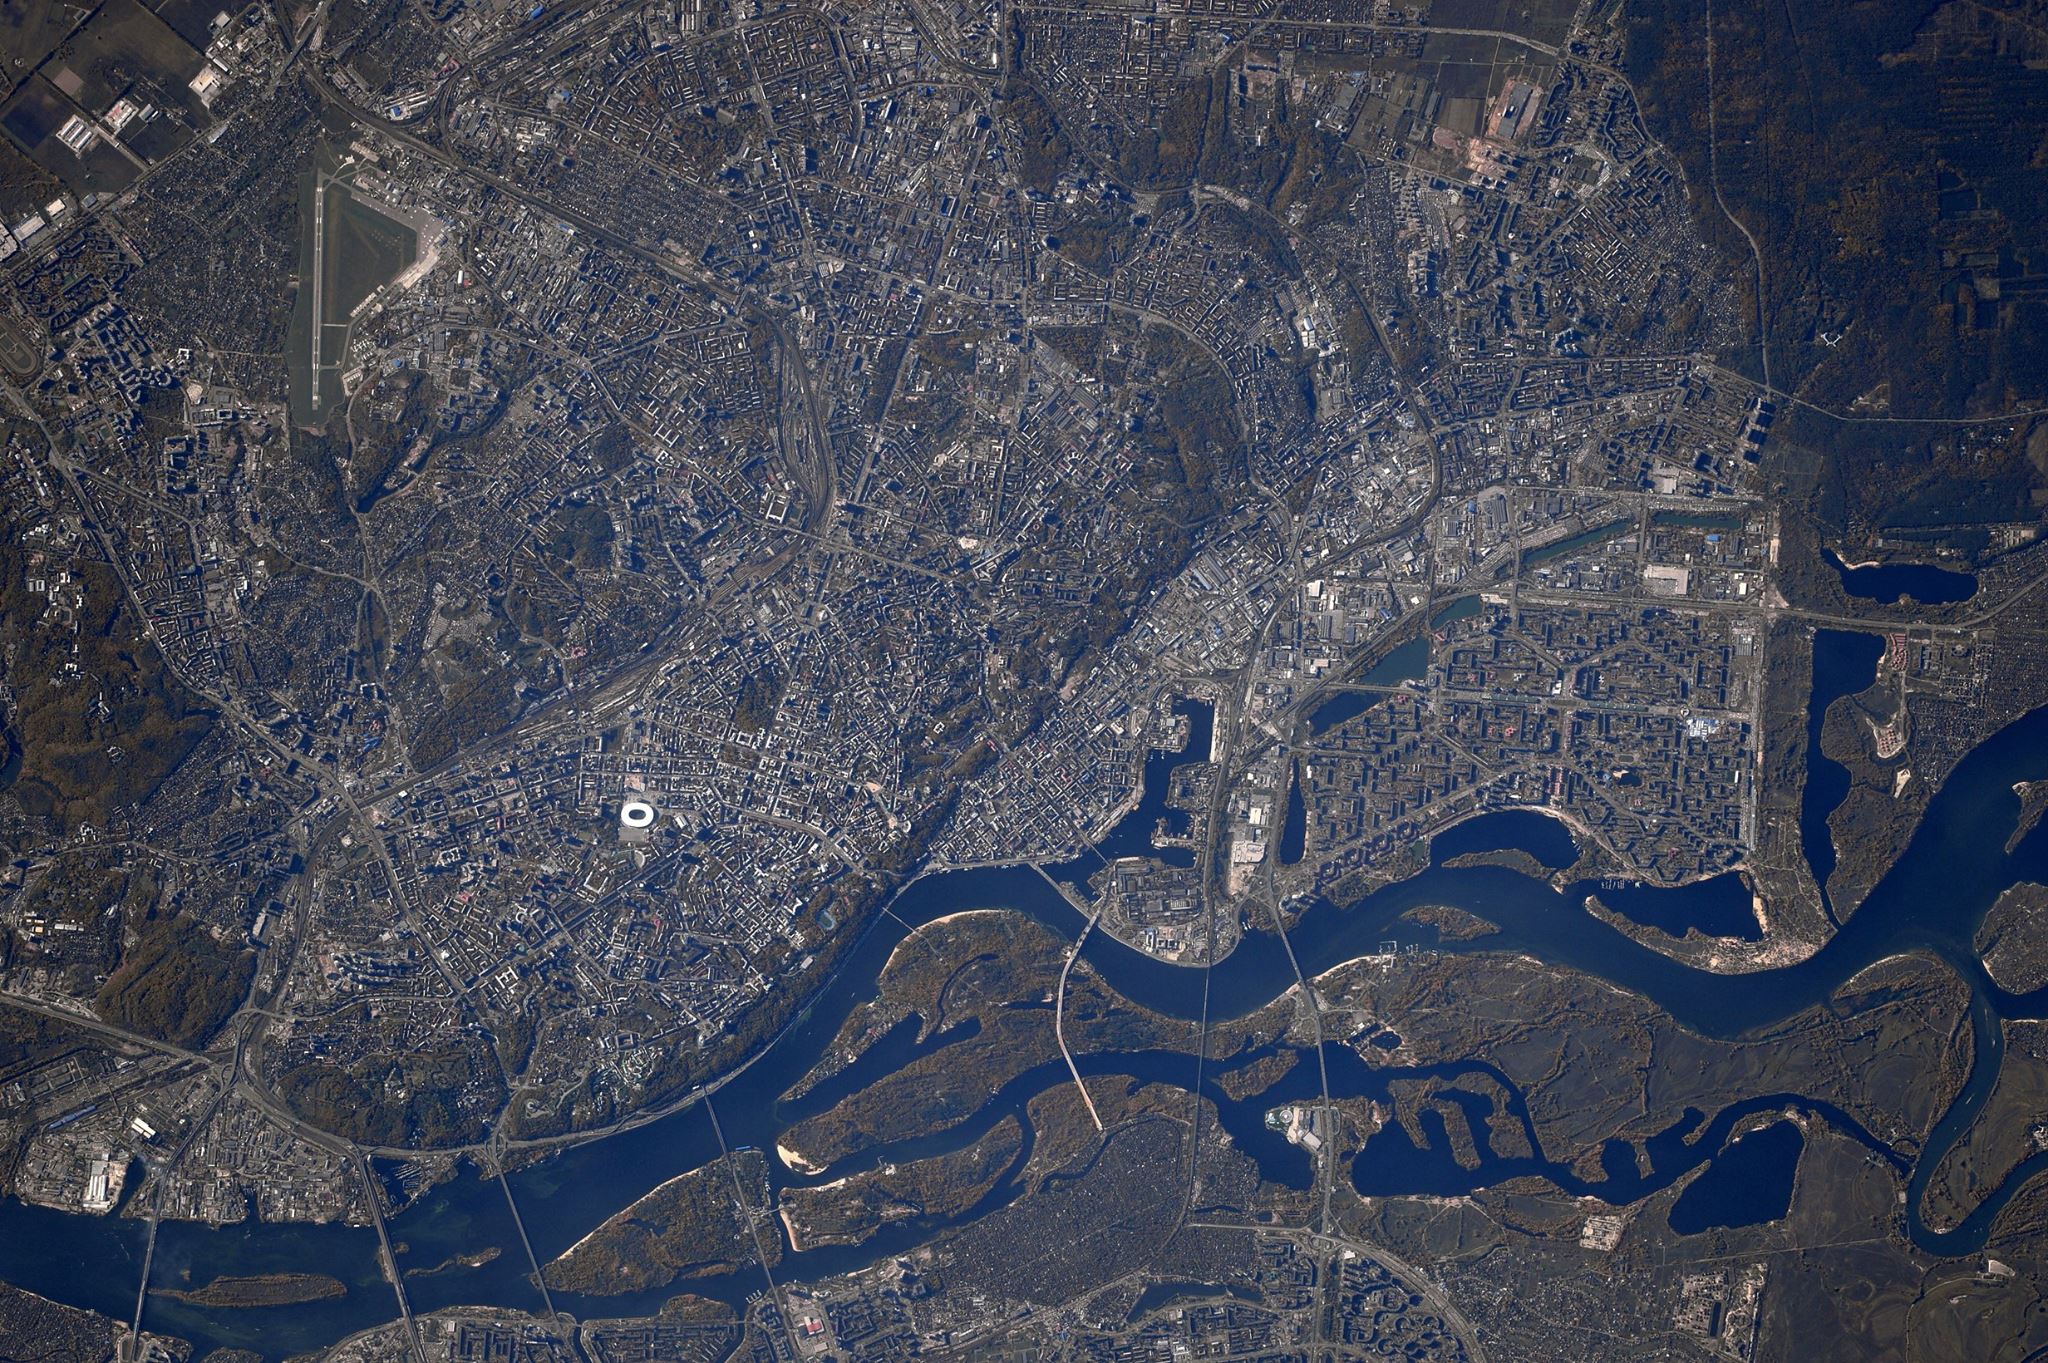 American NASA astronaut Randolph Bresnik published a picture of Kyiv in daytime on Oct. 22. (Facebook/ NASA Astronaut Randy "Komrade" Bresnik)